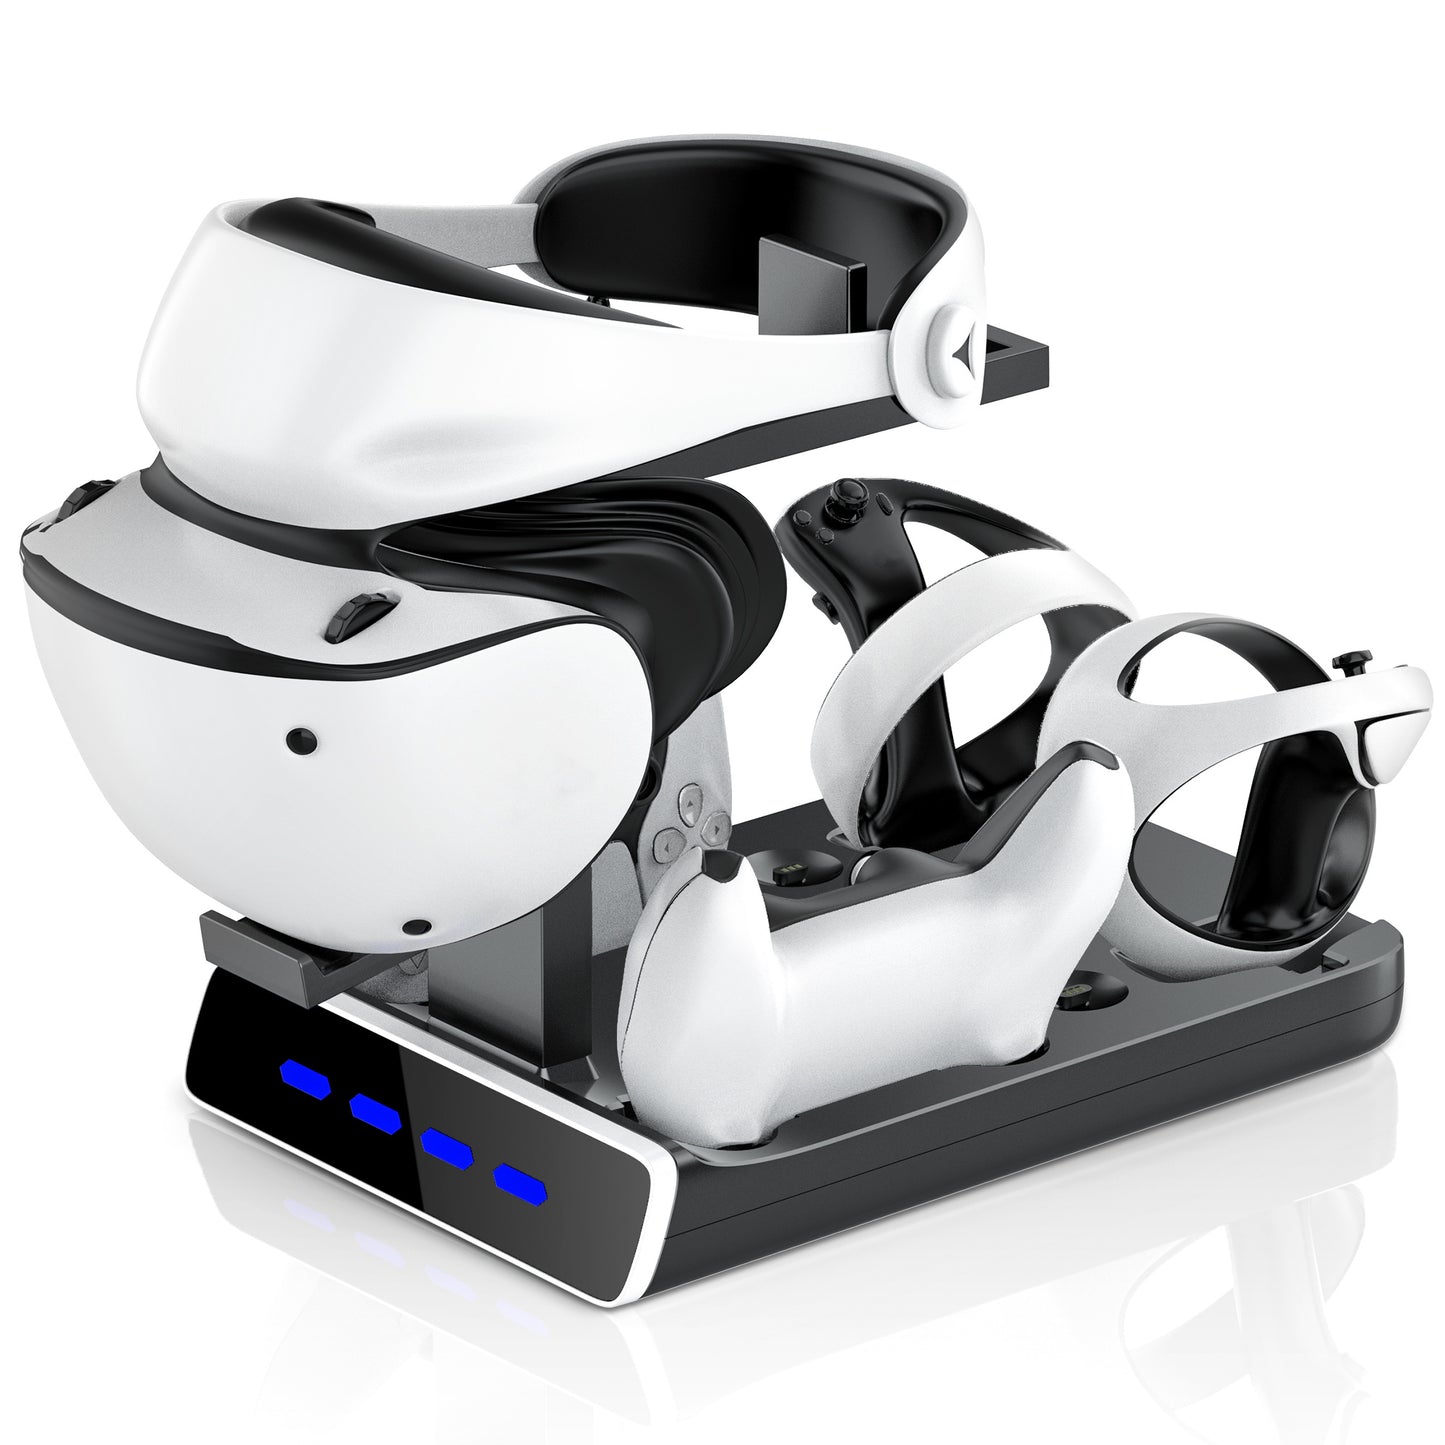 PSVR2 Controller Charging Dock with LED Light, VR Stand Display Your PSVR2, Charging Compatible with PS5 Controller Charger, Playstation VR2 Handle, Charging Cable, Seat Charger